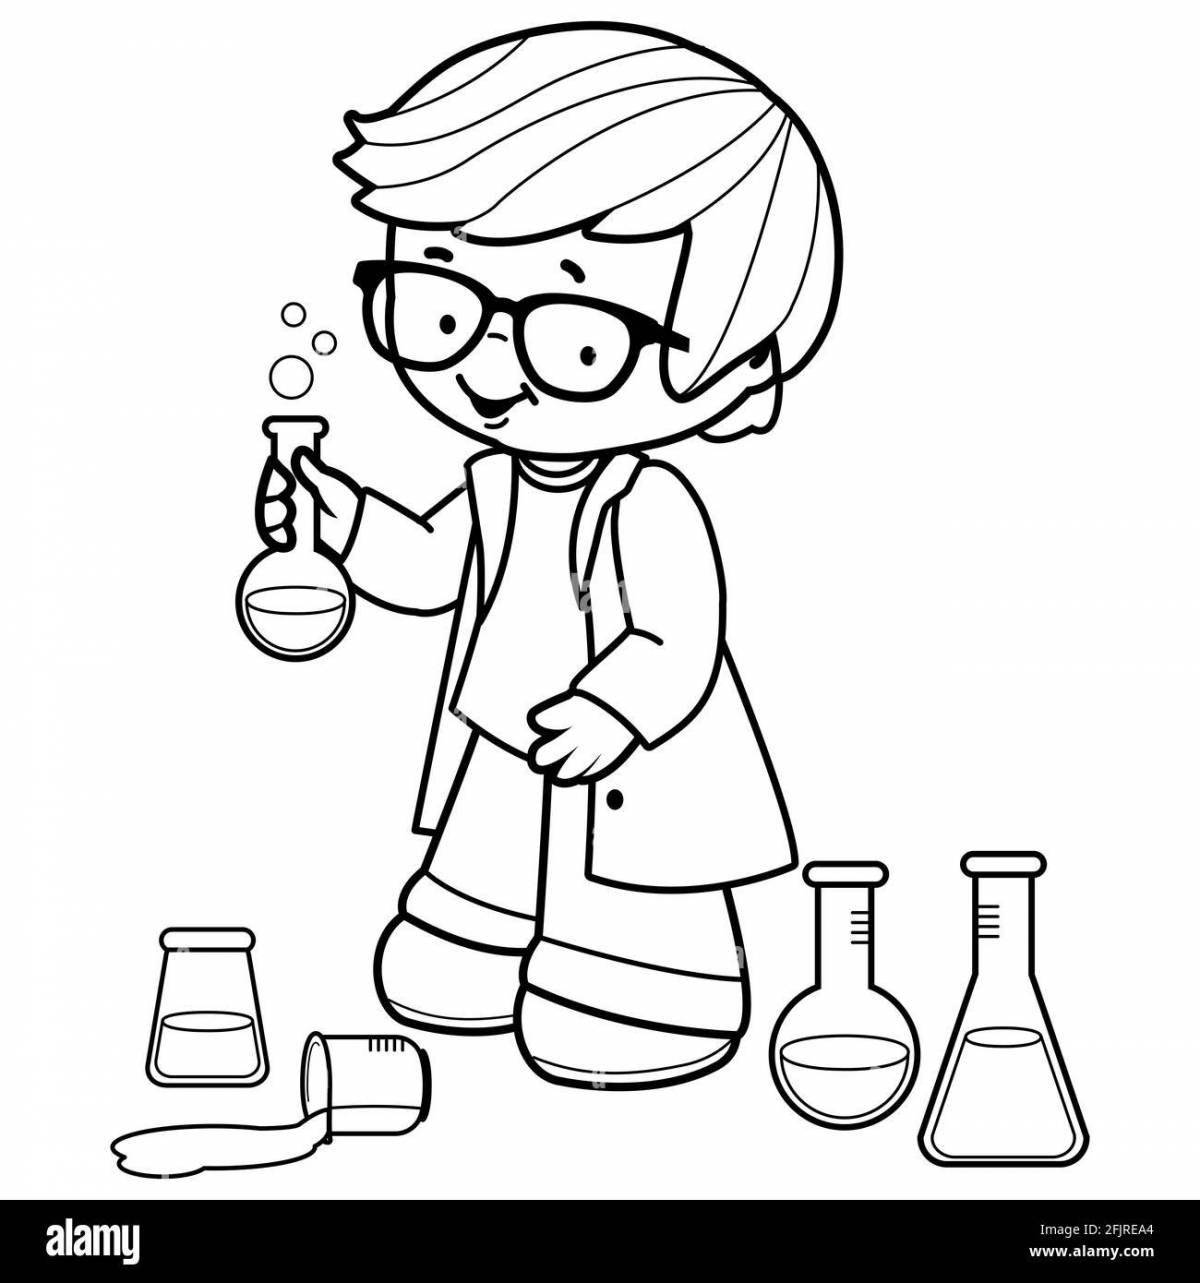 Scientists coloring pages for preschoolers